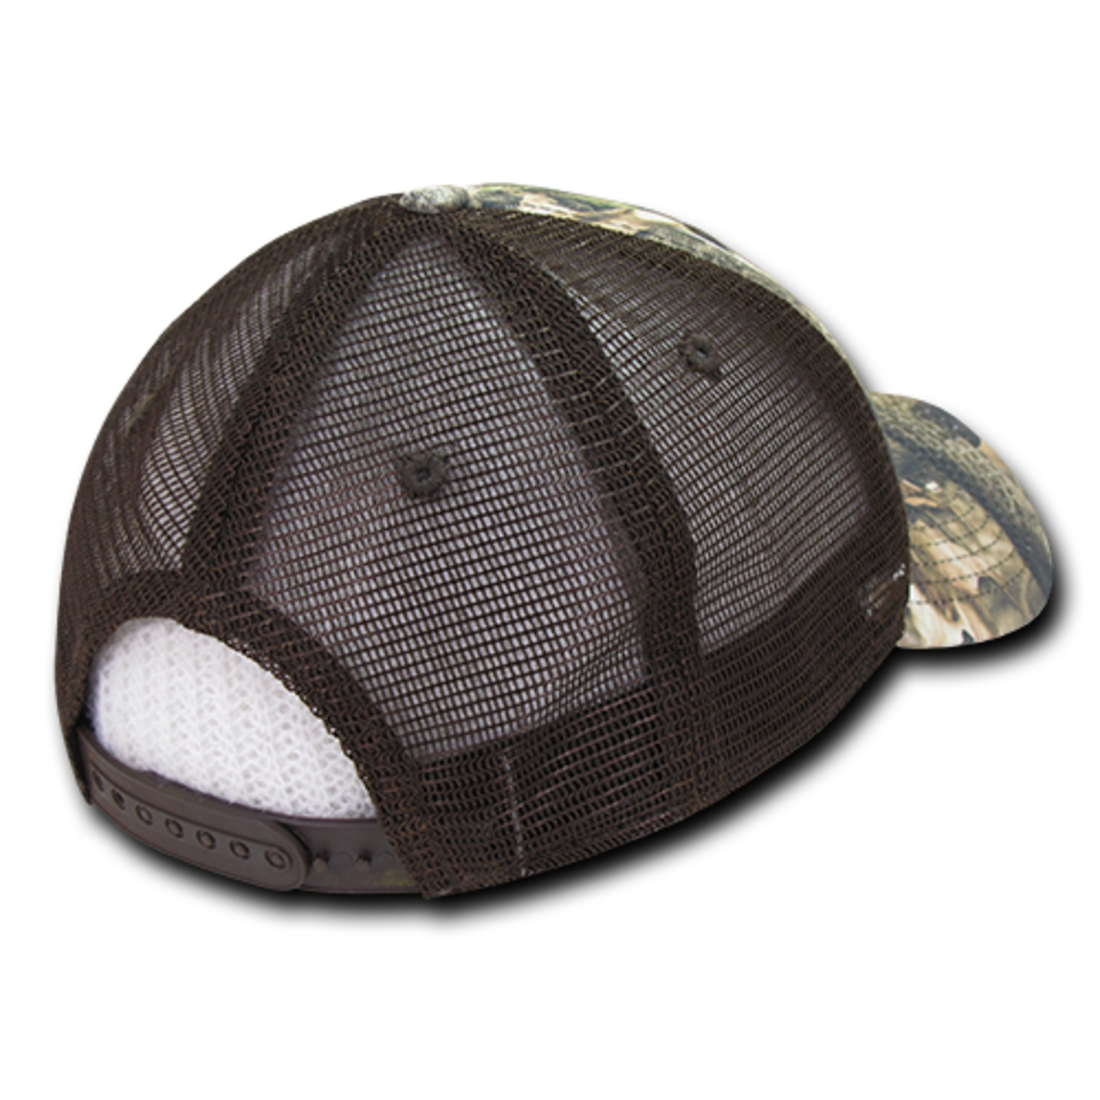 Decky 226 Camouflage Hybricam Trucker Hats High Profile Curved Bill Baseball Caps Wholesale